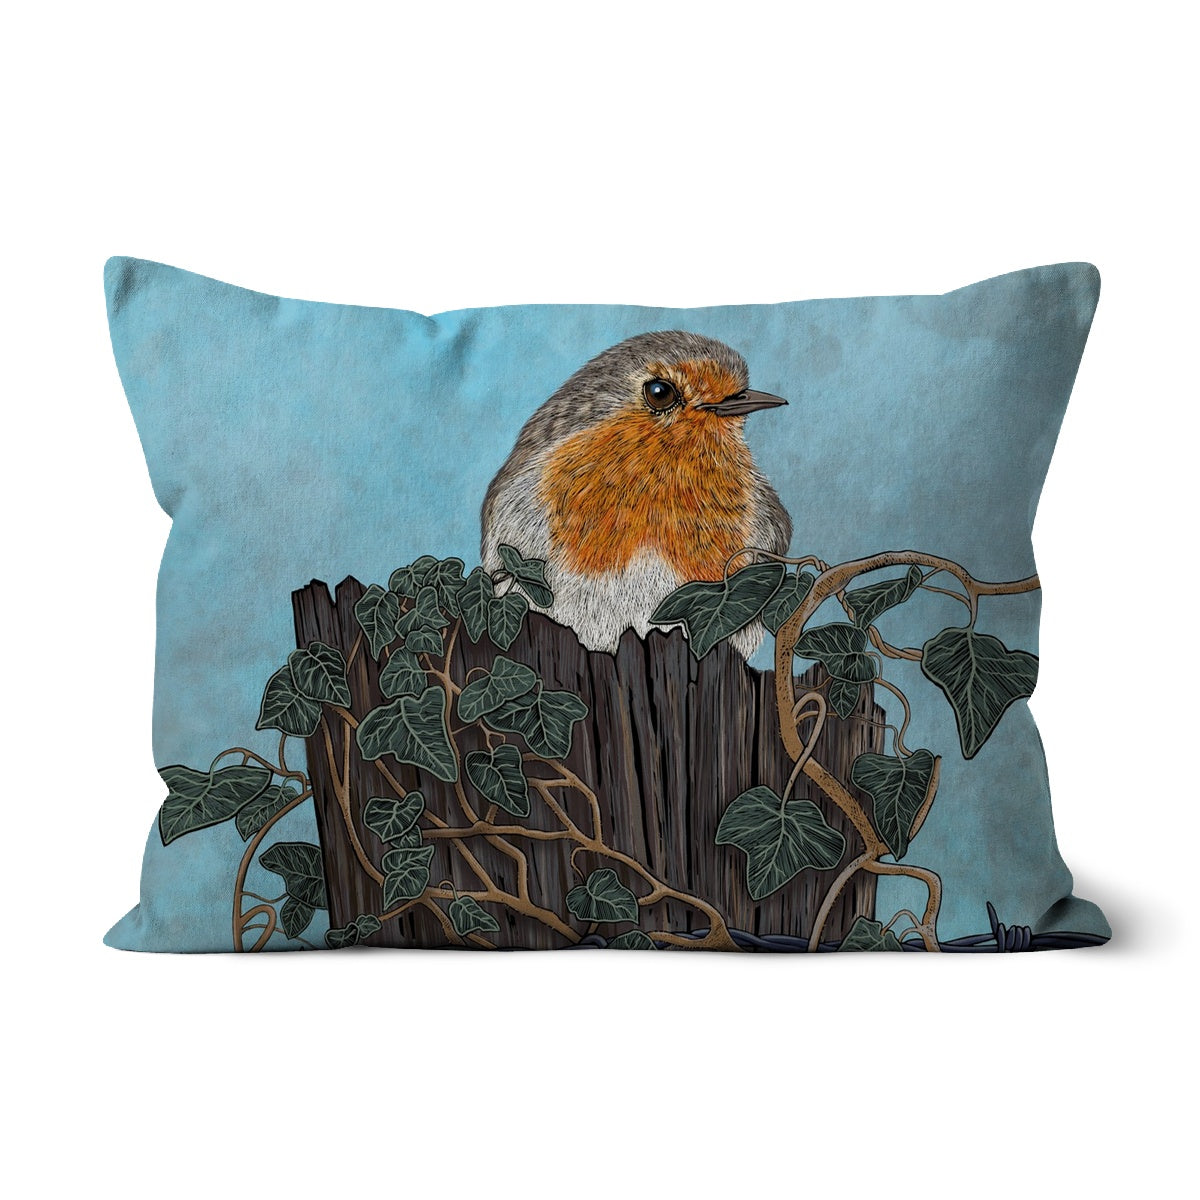 Robin Cushion, designed by Fox and Boo